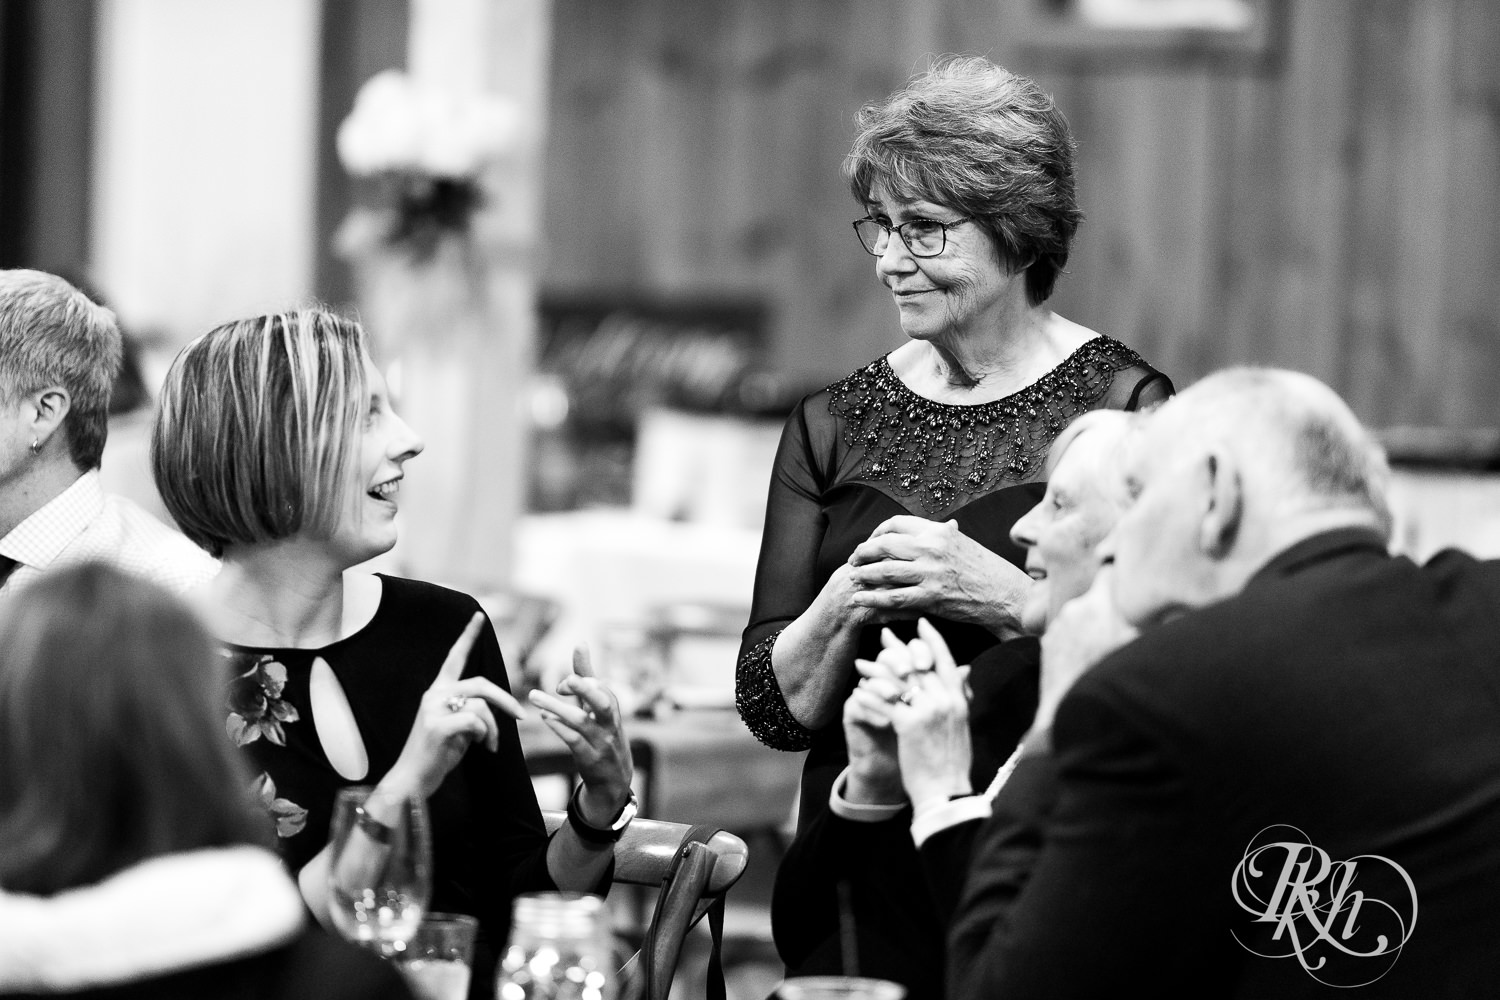 Guests mingle and talk candidly during wedding cocktail hour at Almquist Farm in Hastings, Minnesota.